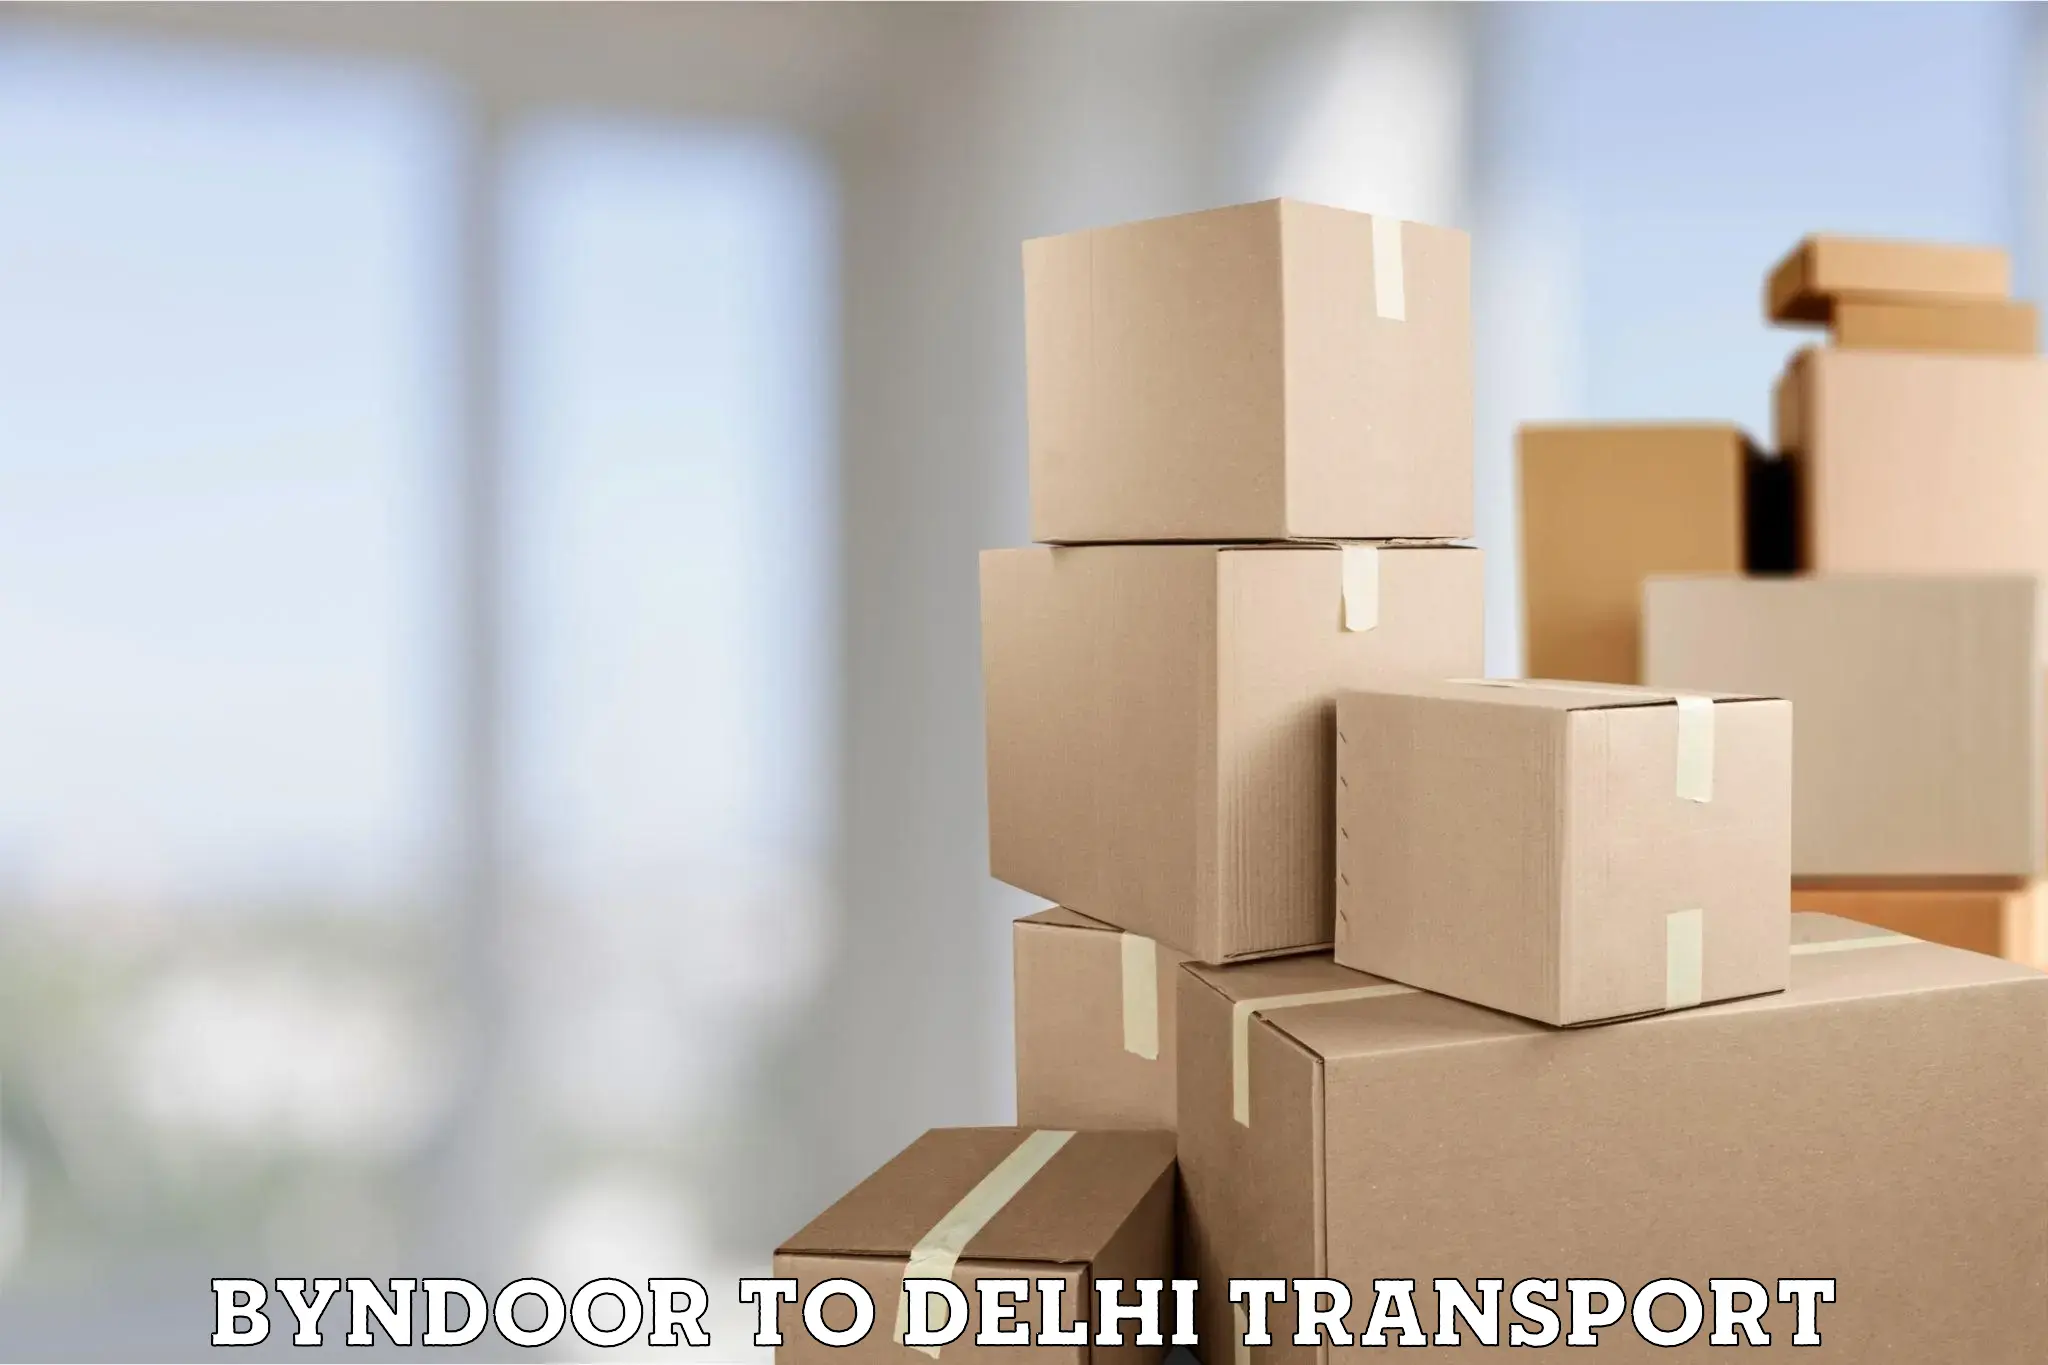 Express transport services in Byndoor to Delhi